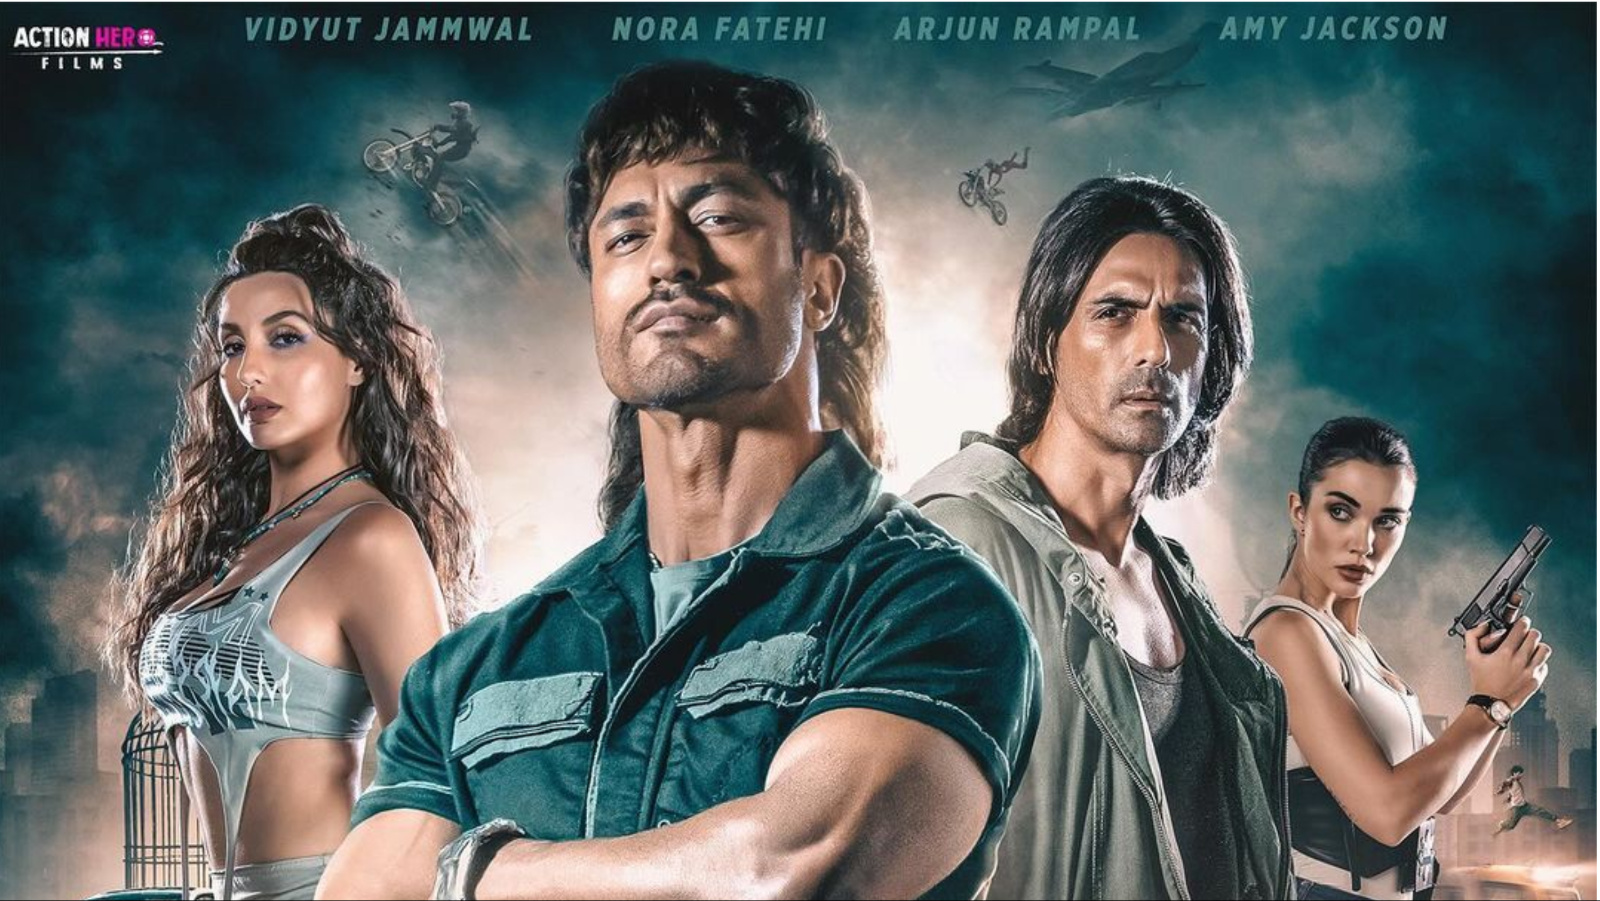 Crakk box office collection day 1: Vidyut Jammwal nearly beats personal  record with Rs 4 crore opening